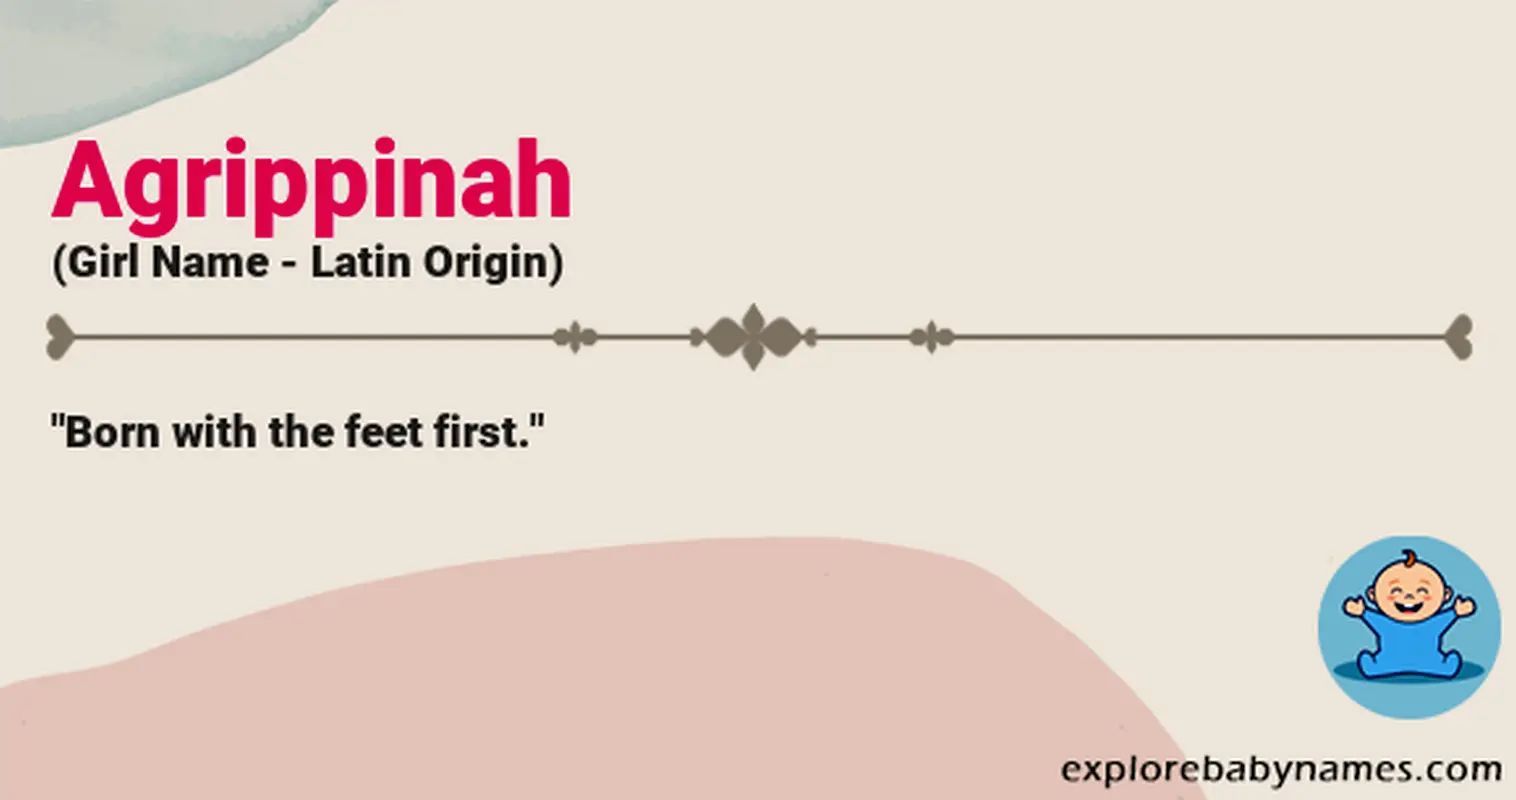 Meaning of Agrippinah